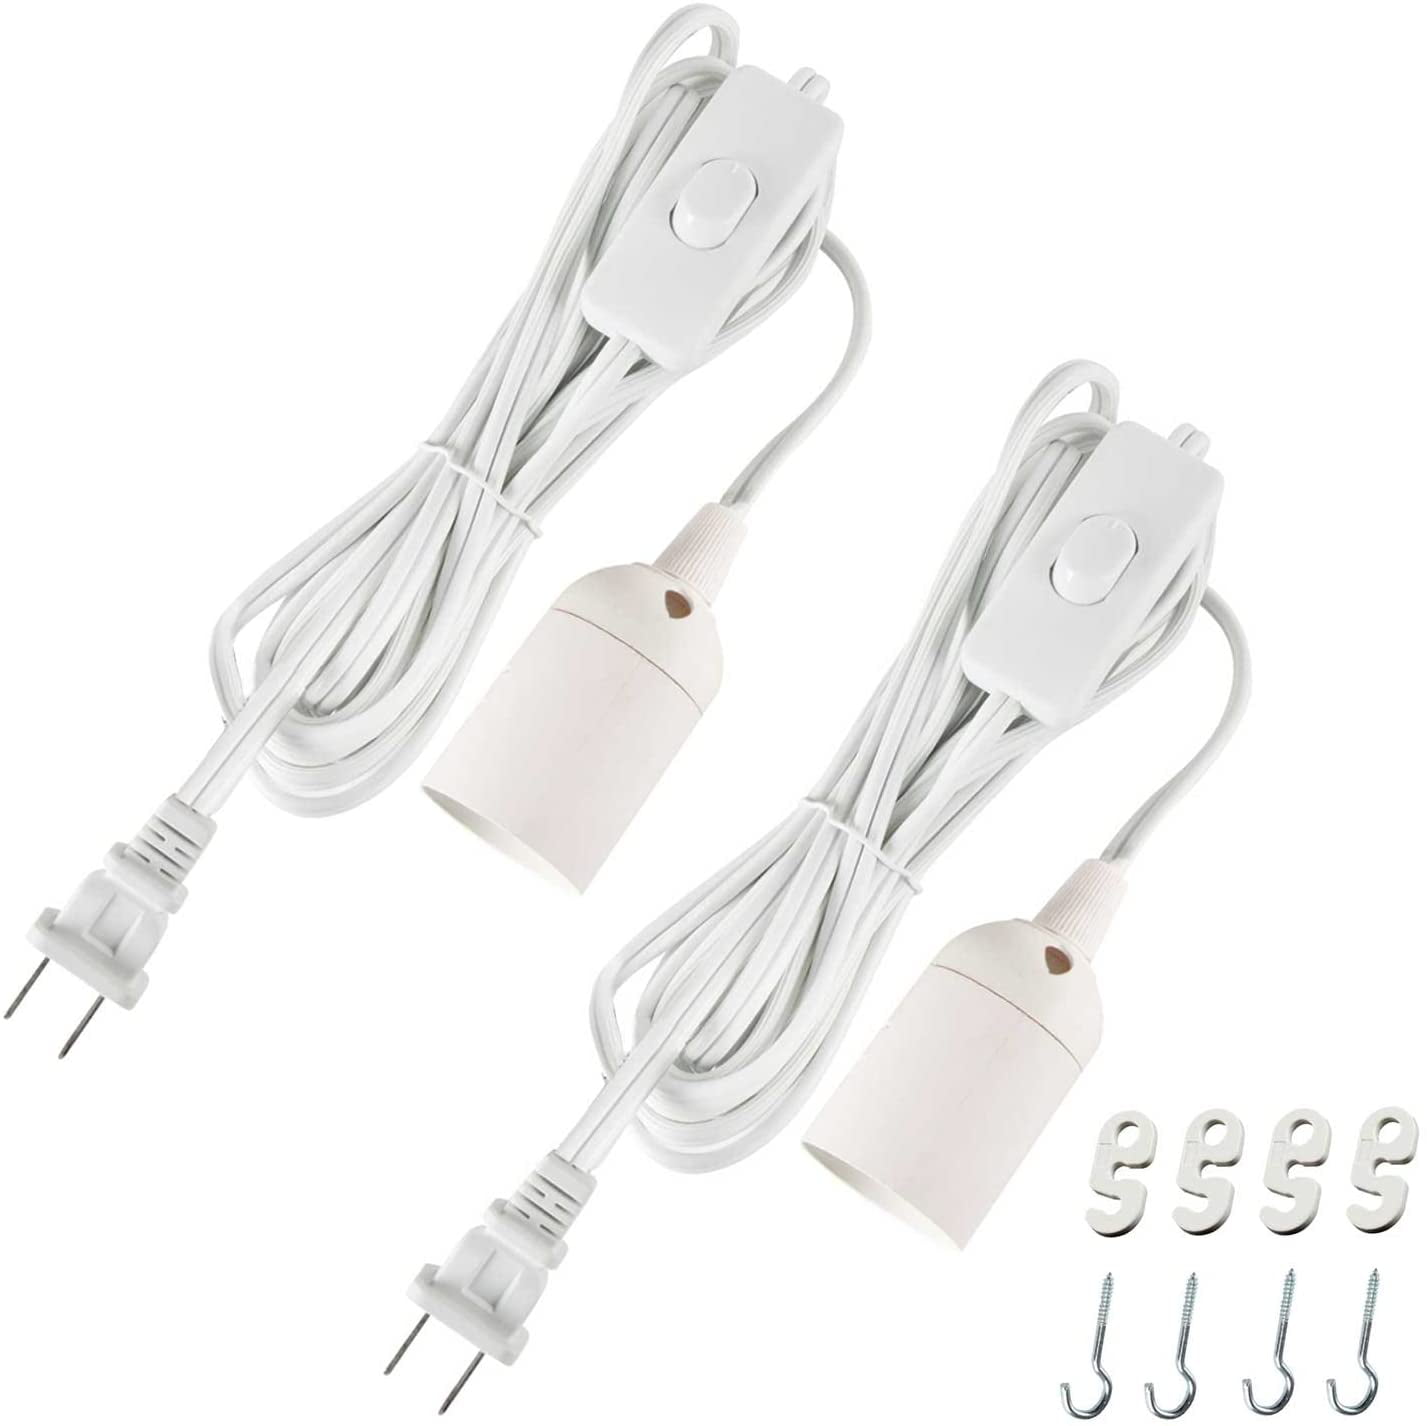 12 Feet White Hanging Light Cord with E27 Socket to UK AC Power Cord with On/Off 